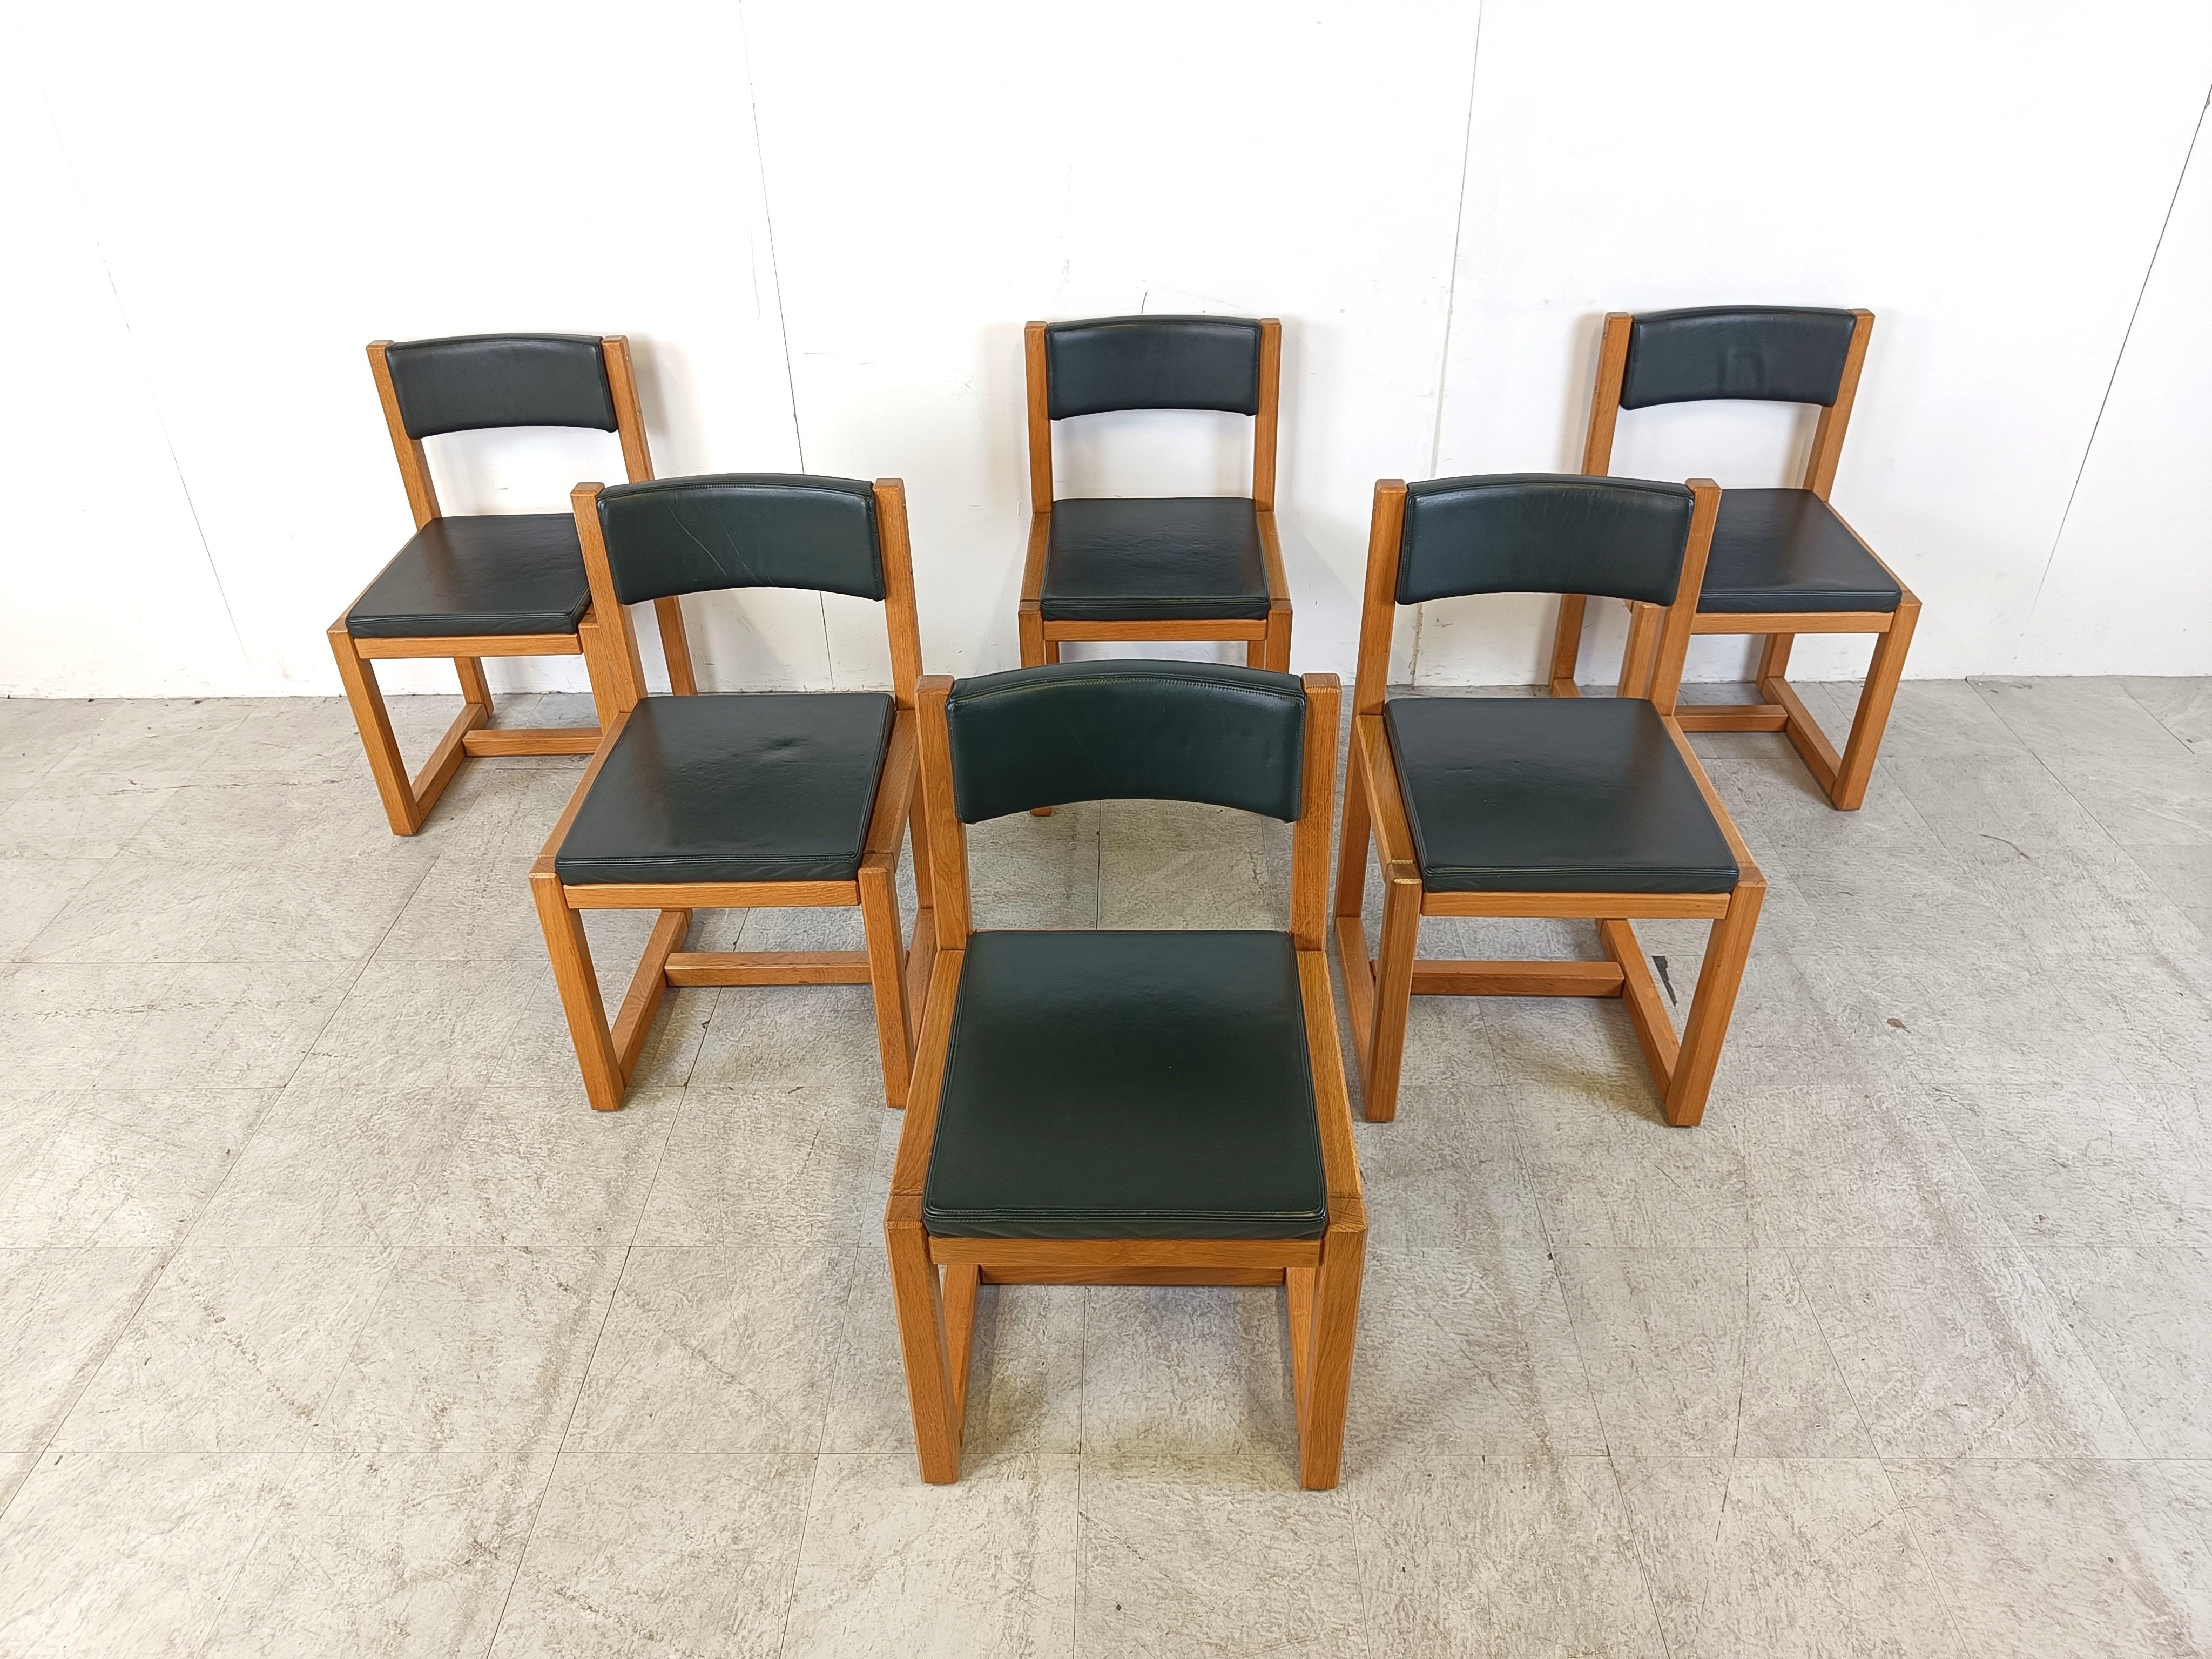 Set of 6 dining chairs with an architectural solid oak frame and dark grey leather upholstery.

The chairs are very comfortable.

Very good condition.

1970s - Made in Belgium

Dimensions:
Height 80cm/31.49